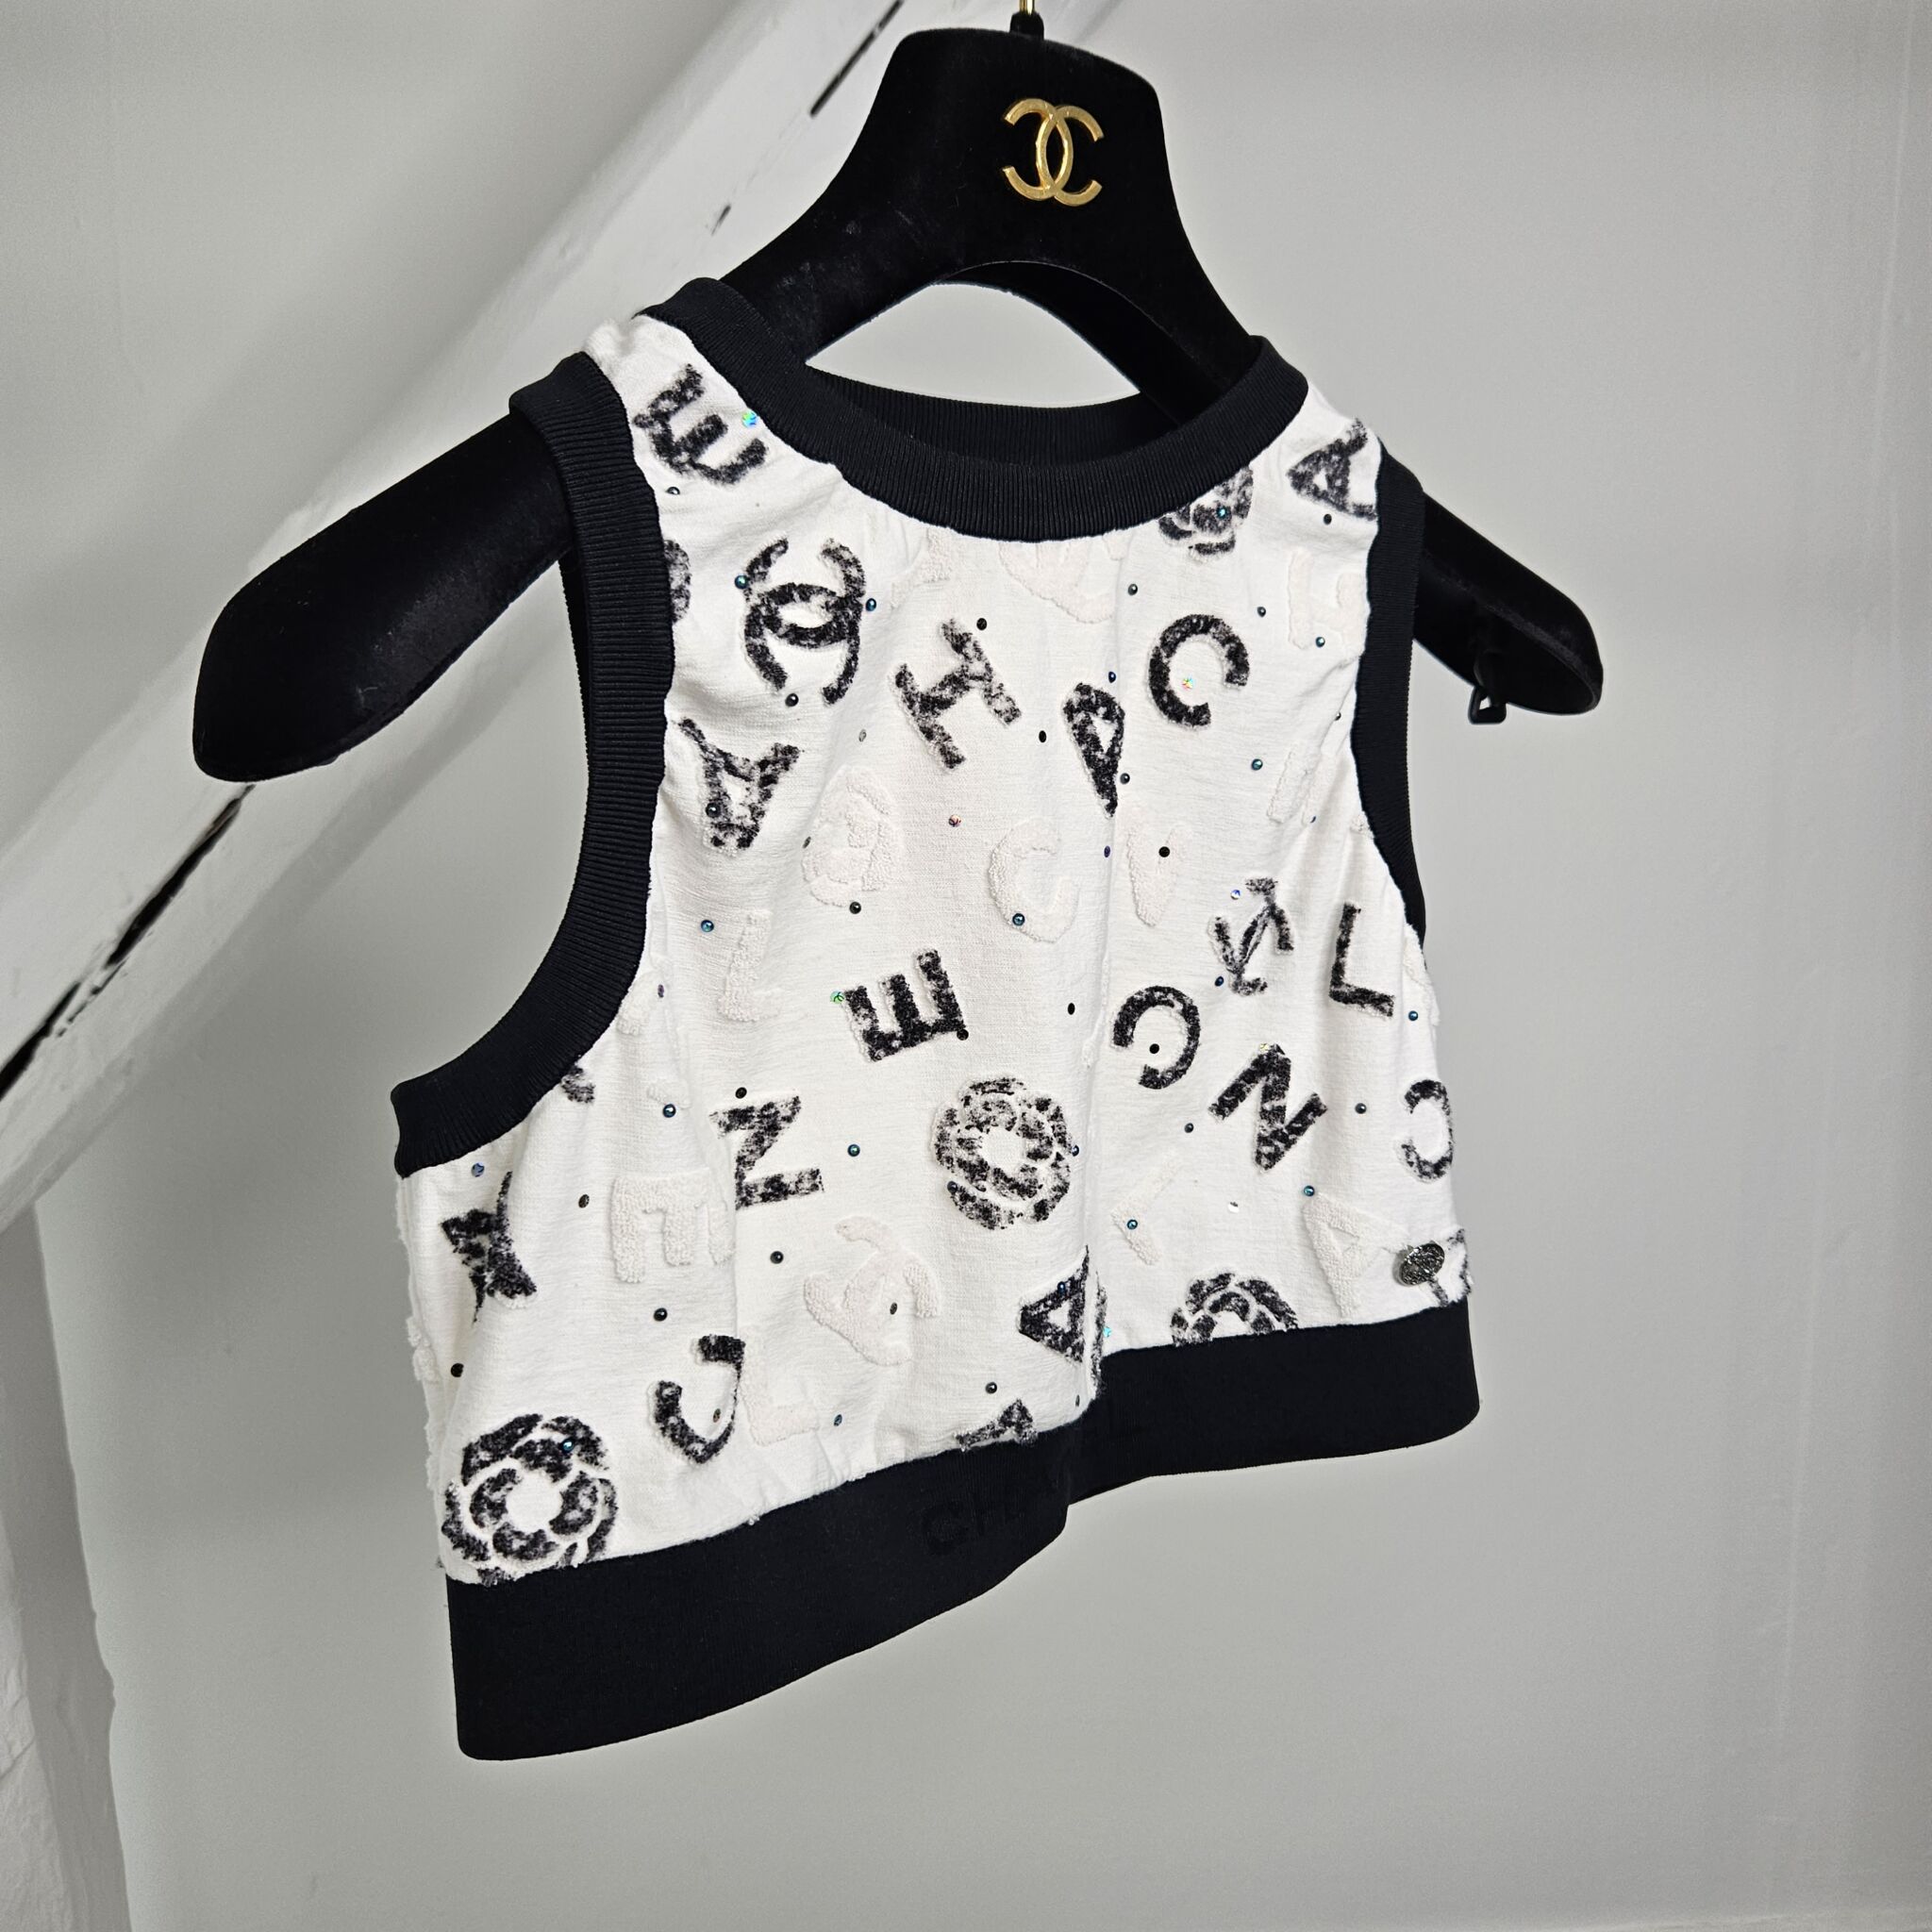 Chanel Crop Top, White/Black, Small - Laulay Luxury